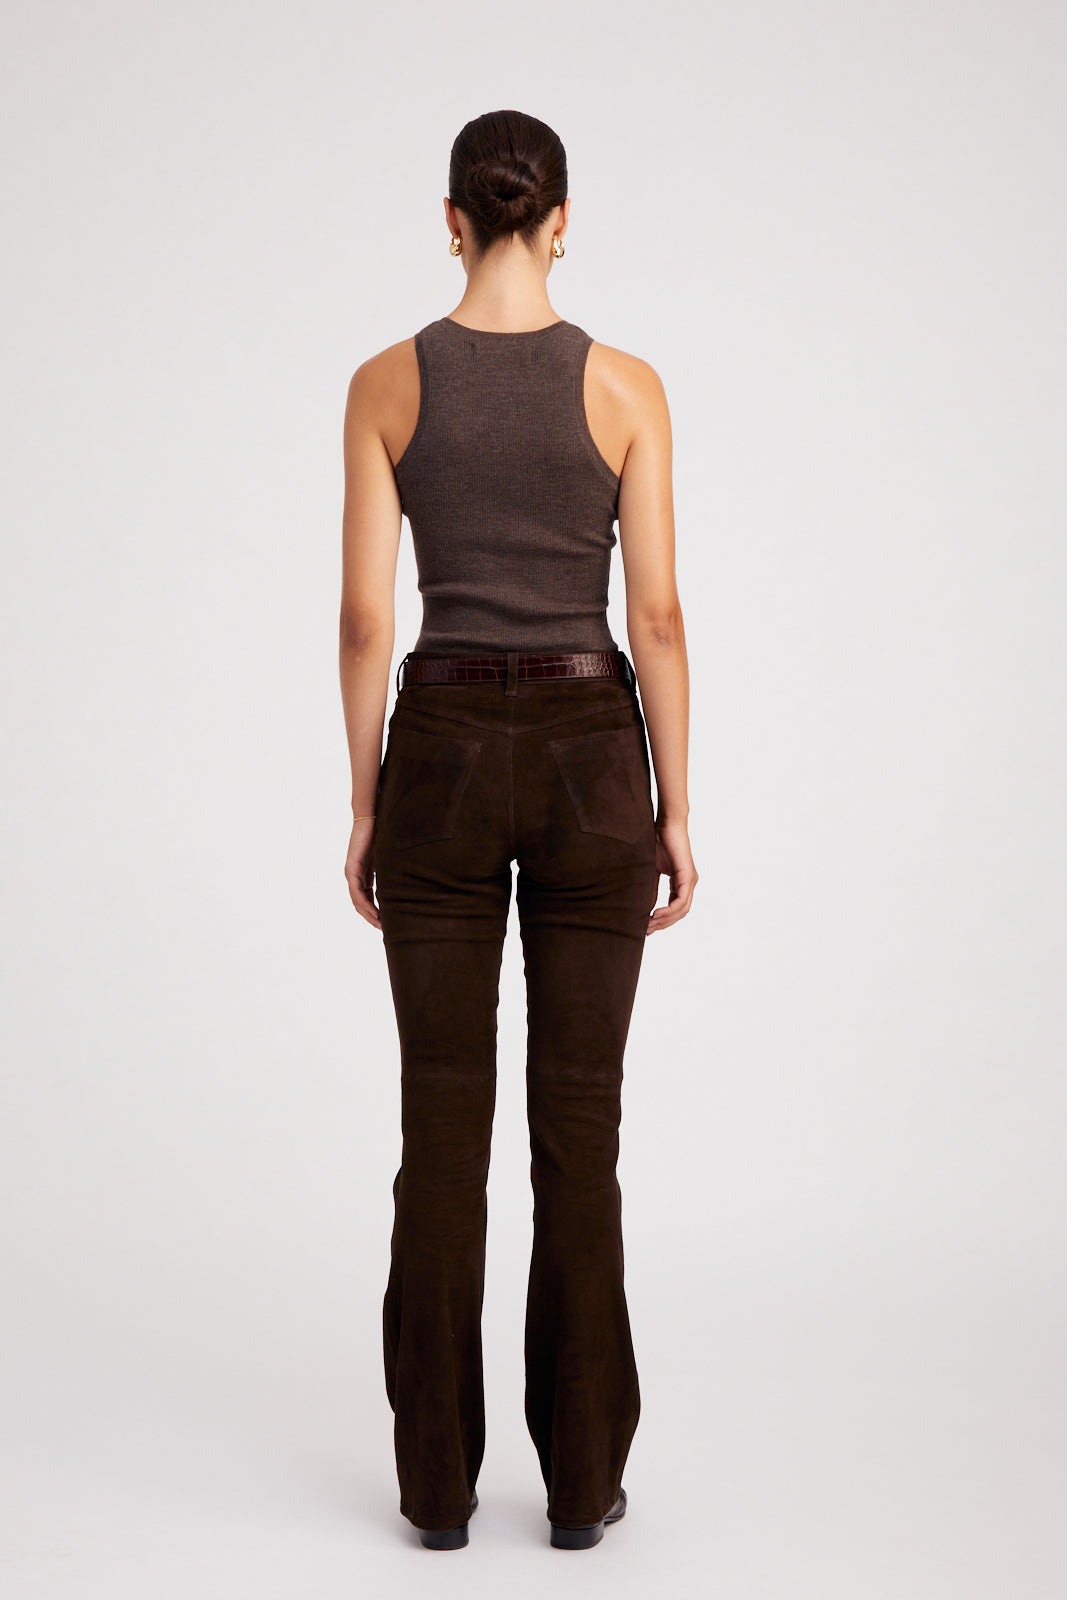 Heather Brown Cashmere Racer Tank